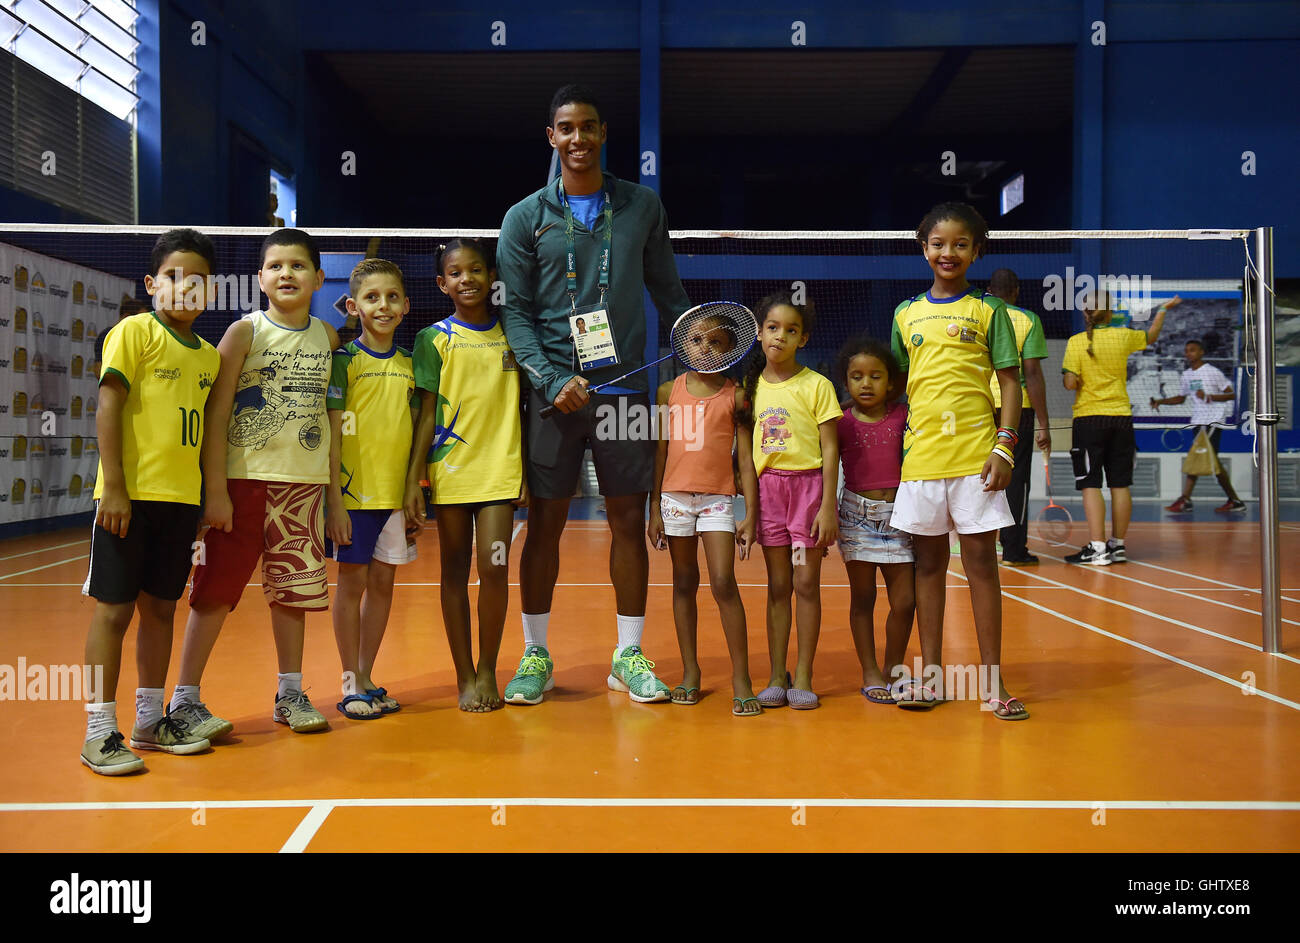 Rio de Janeiro, Brazil. 9th Aug, 2016. Brazilian badminton player Ygor  Coelho de Oliveira (c) is surrounded by children from the Miratus Centre in  the Chacrinha favela, which was founded by his